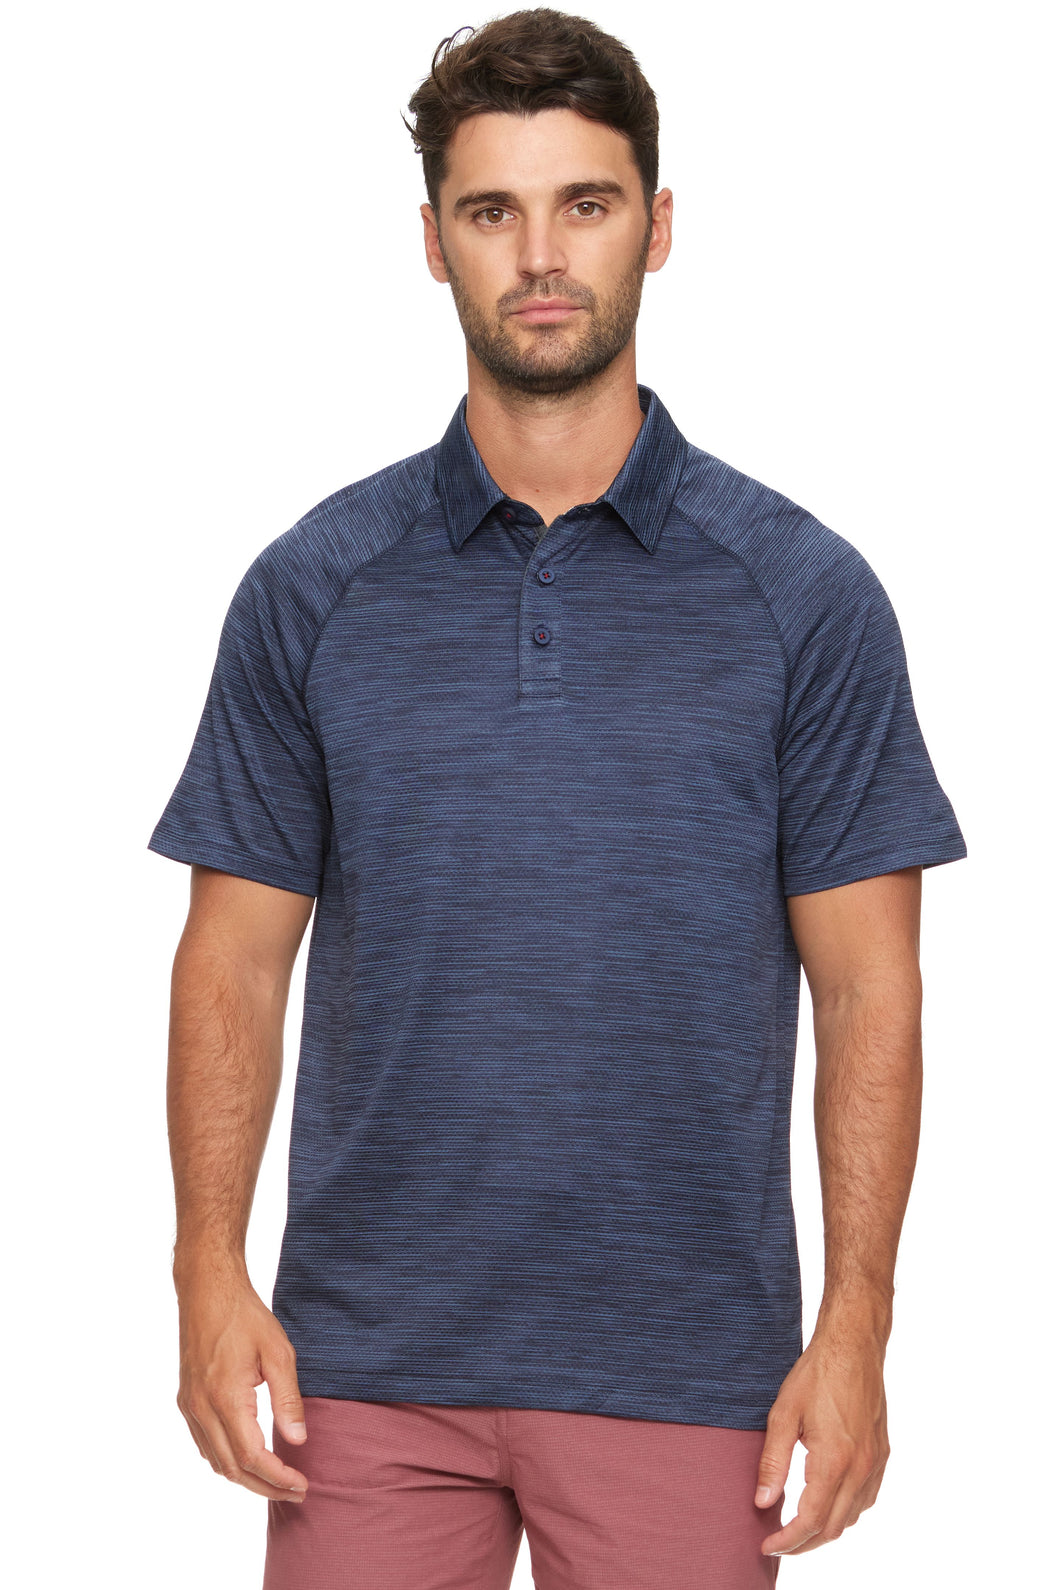 The Springfield Perforated Raglan Performance Polo